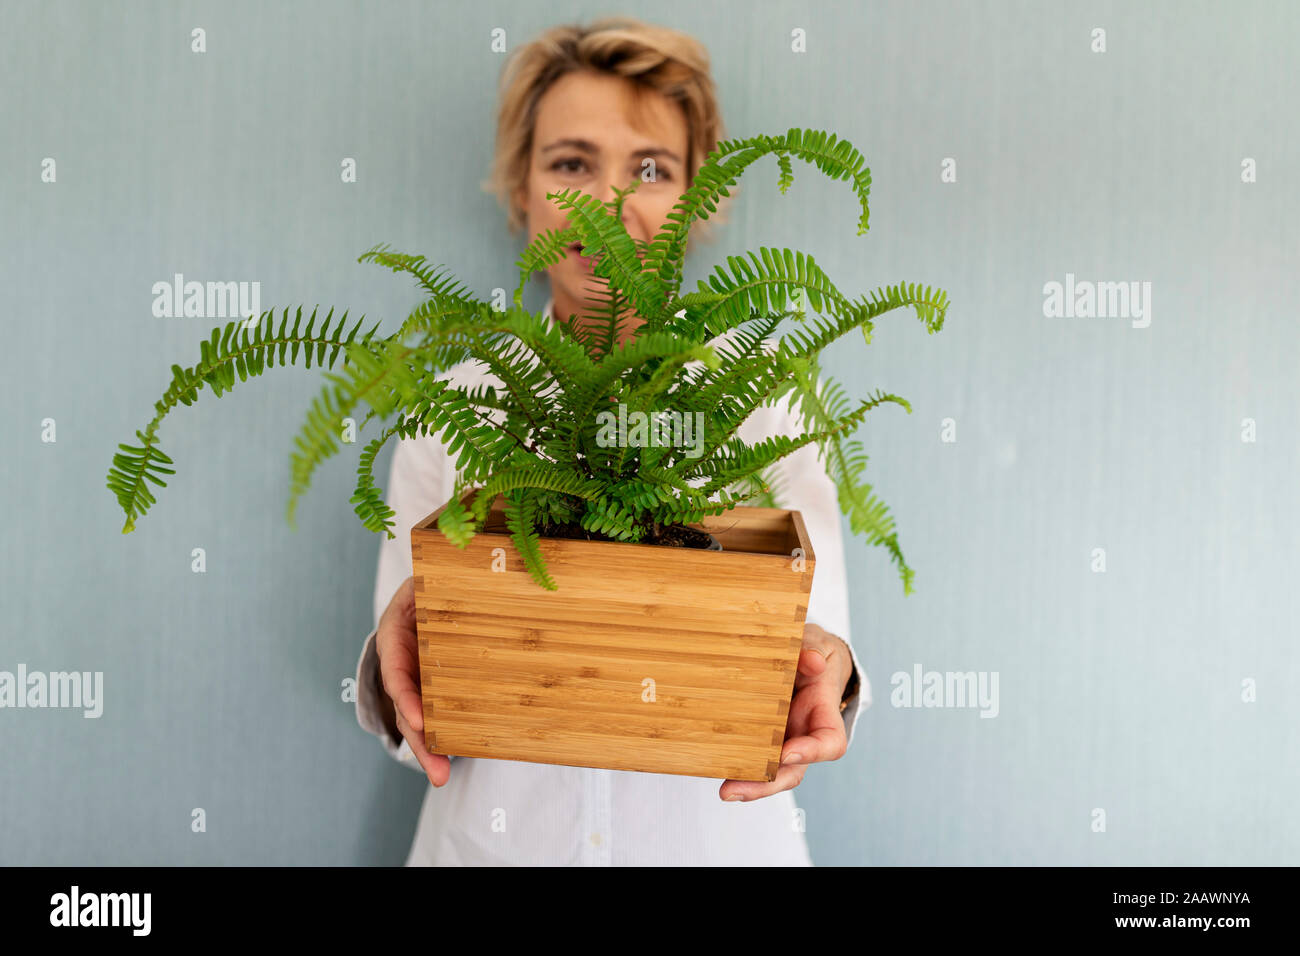 Mature woman standing at a wall holding a fern plant Stock Photo